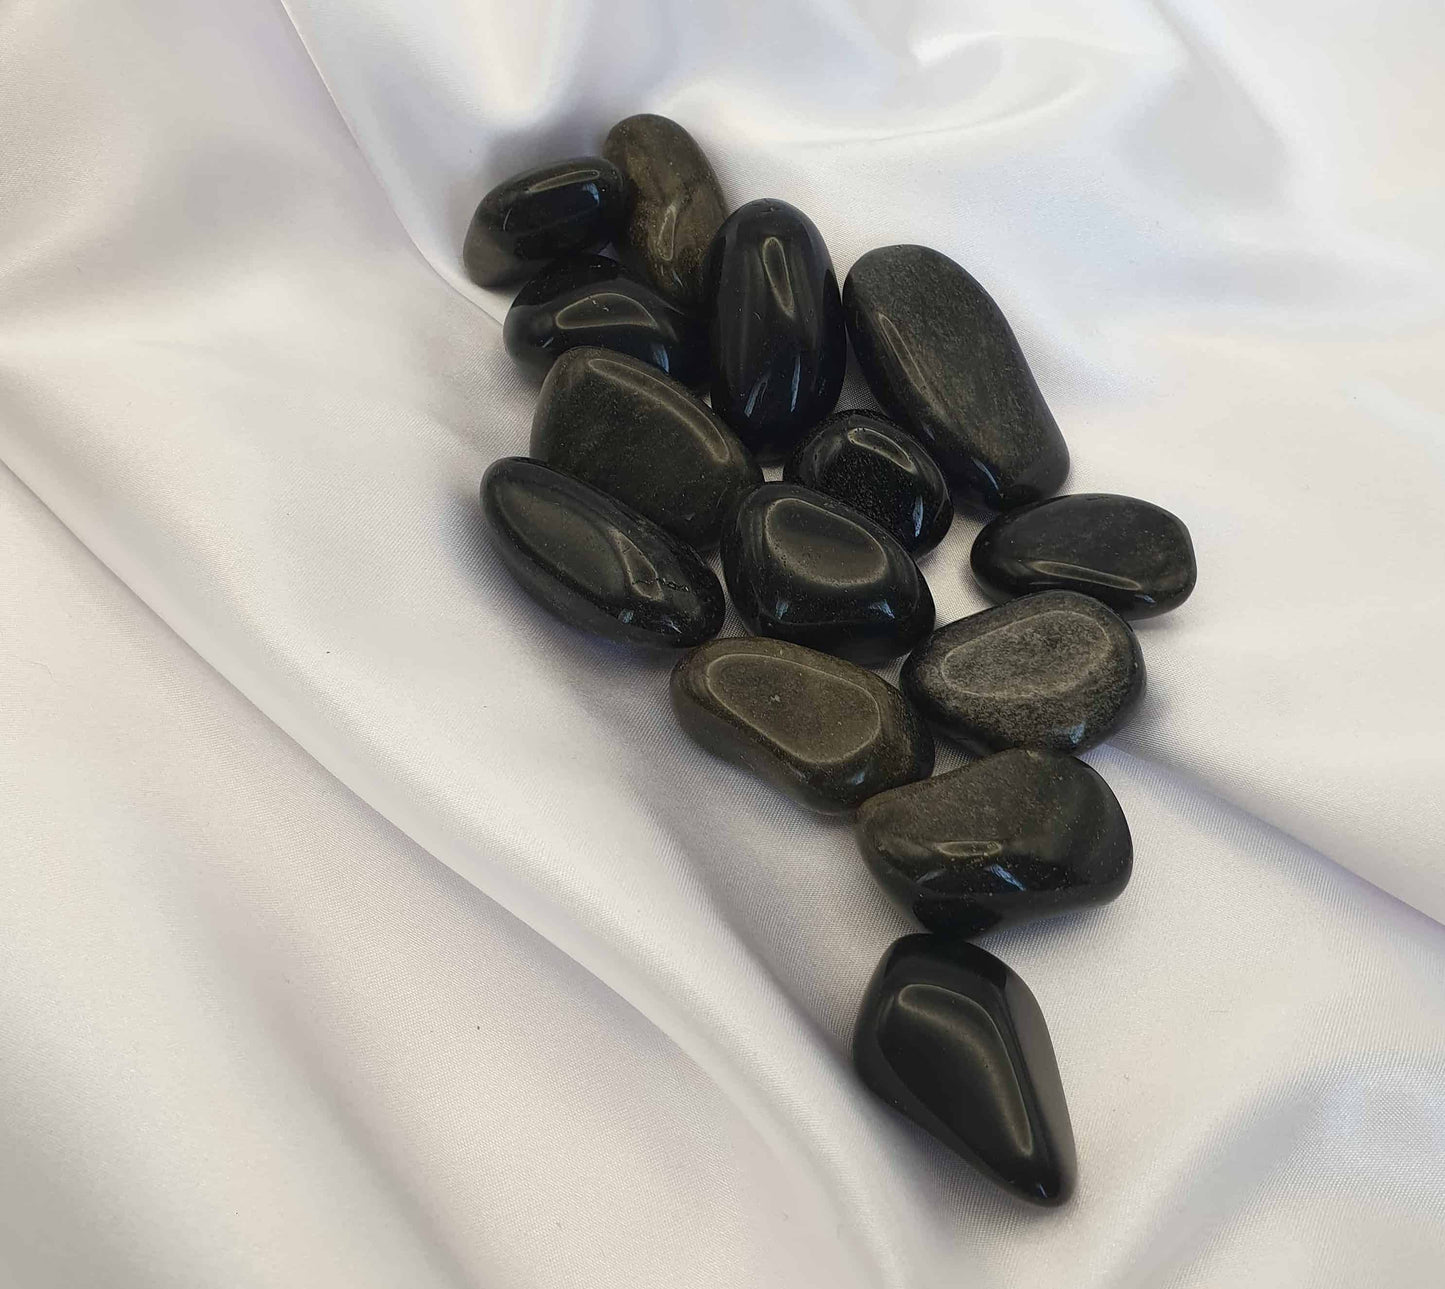 Gold Sheen Obsidian is said to help dissolve negative energy. These tumbled stones can help in releasing ego and balancing energy fields. This is an interesting stone as it is not thought to give energy but to help seekers discover where the healing needs to happen, this is why it is a popular stone with crystal healers.